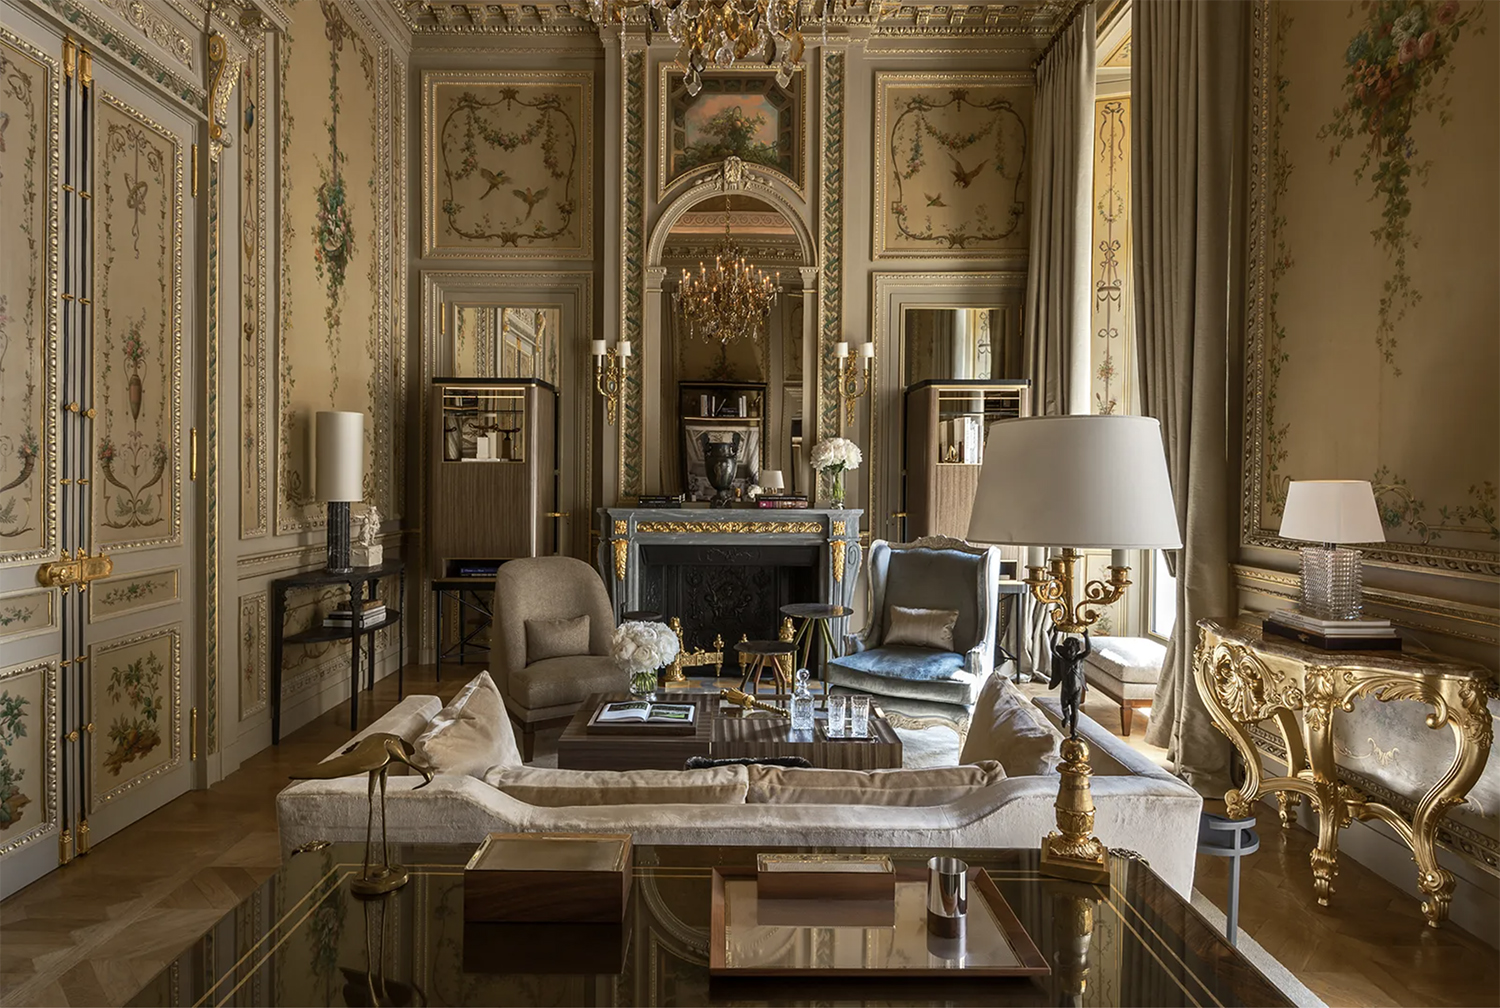 An opulent Louis XV inspired living area of one of the suites at Hotel de Crillon in Paris